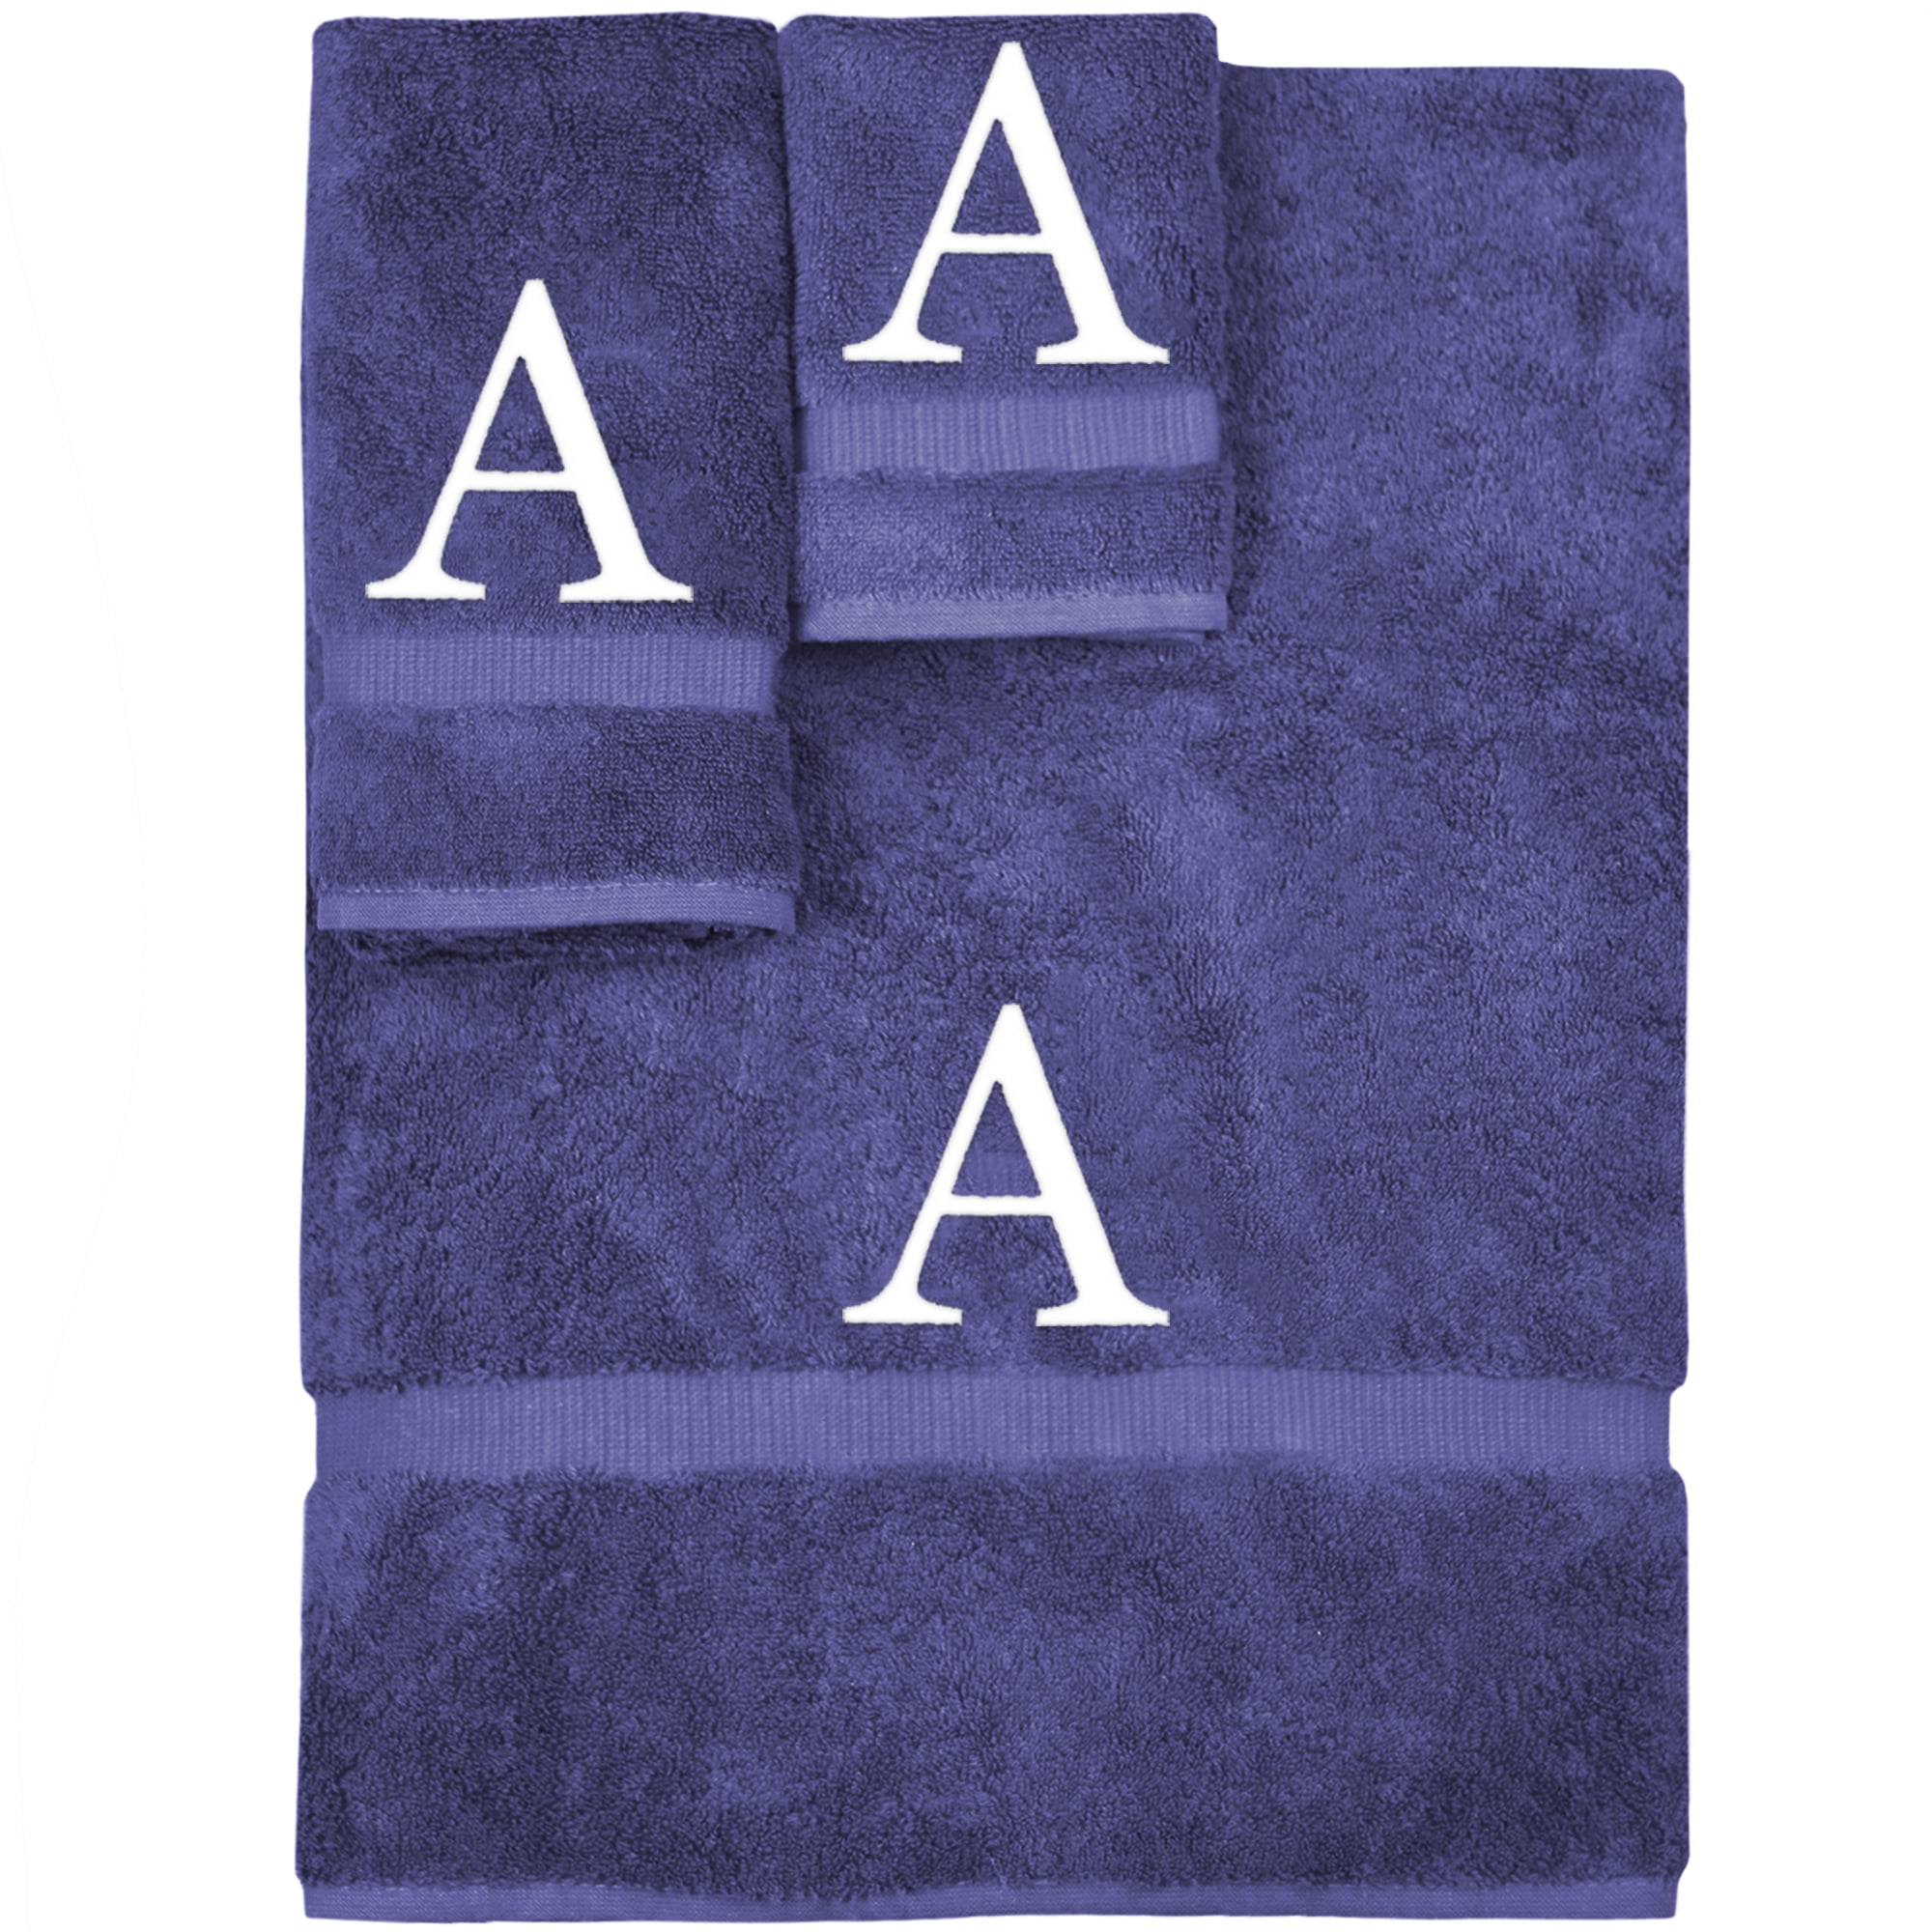 6 Piece Monogrammed Towel Set - Excellent Gift for Grads, New Homeowners or  Yourself!